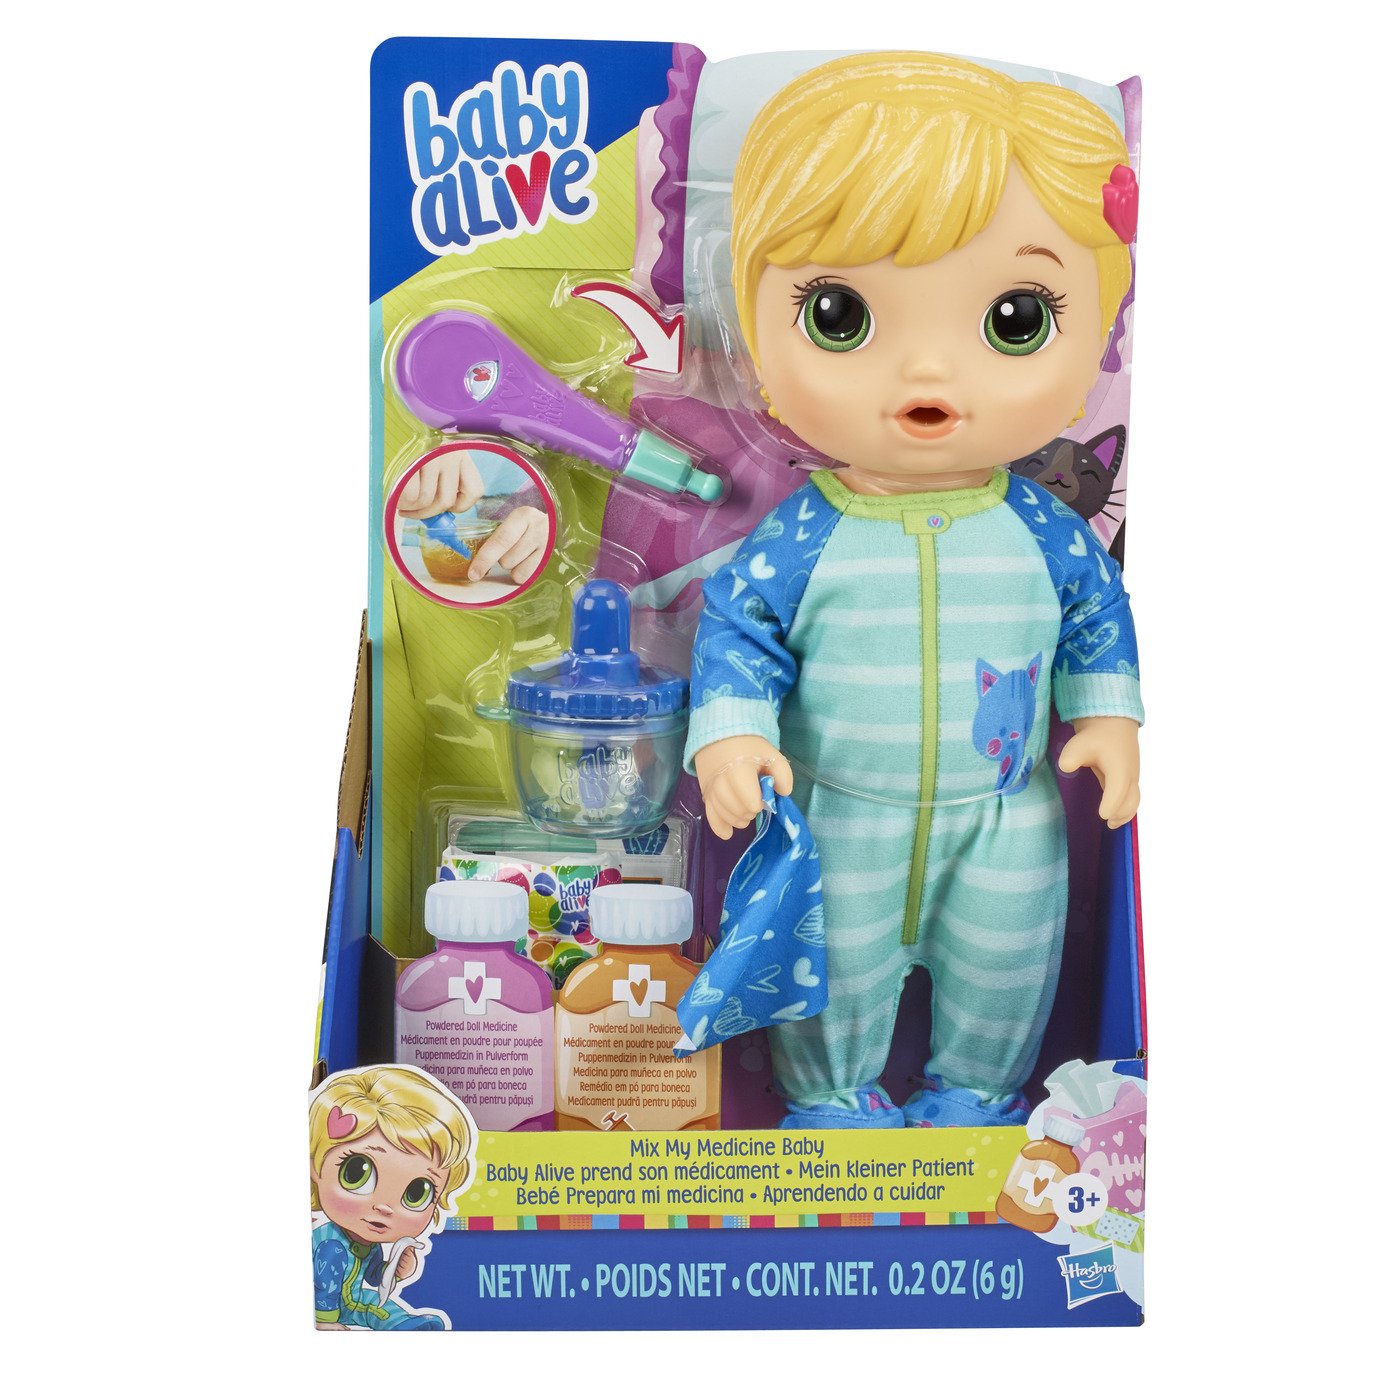 Baby Alive Mix My Medicine Baby Doll Review